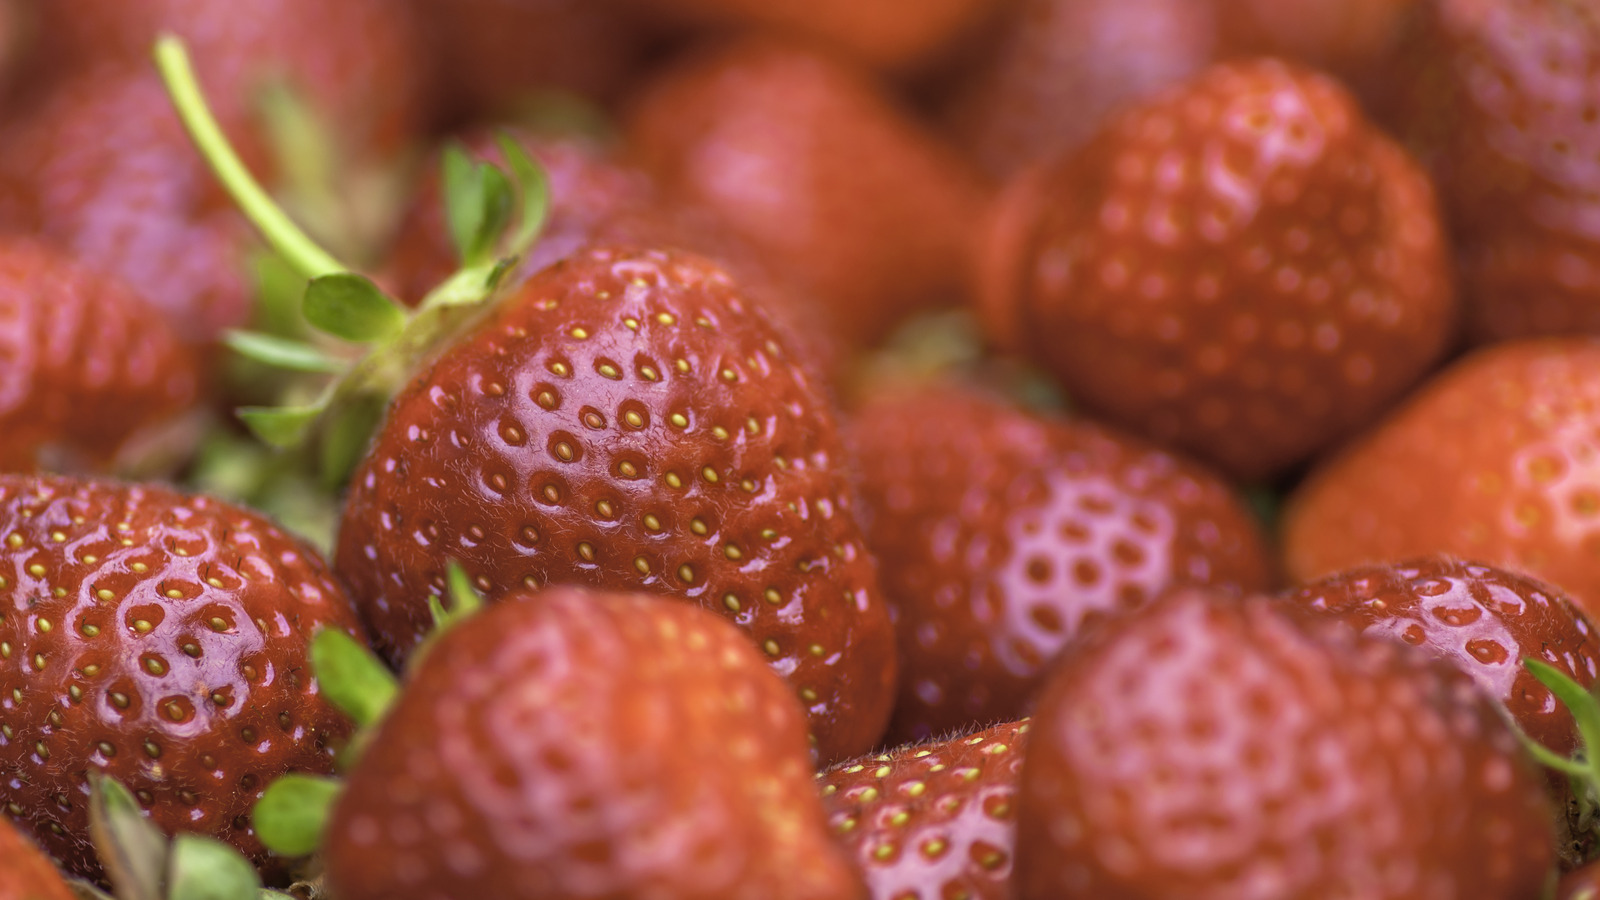 https://www.foodrepublic.com/img/gallery/15-things-you-didnt-know-about-strawberries/l-intro-1694037534.jpg